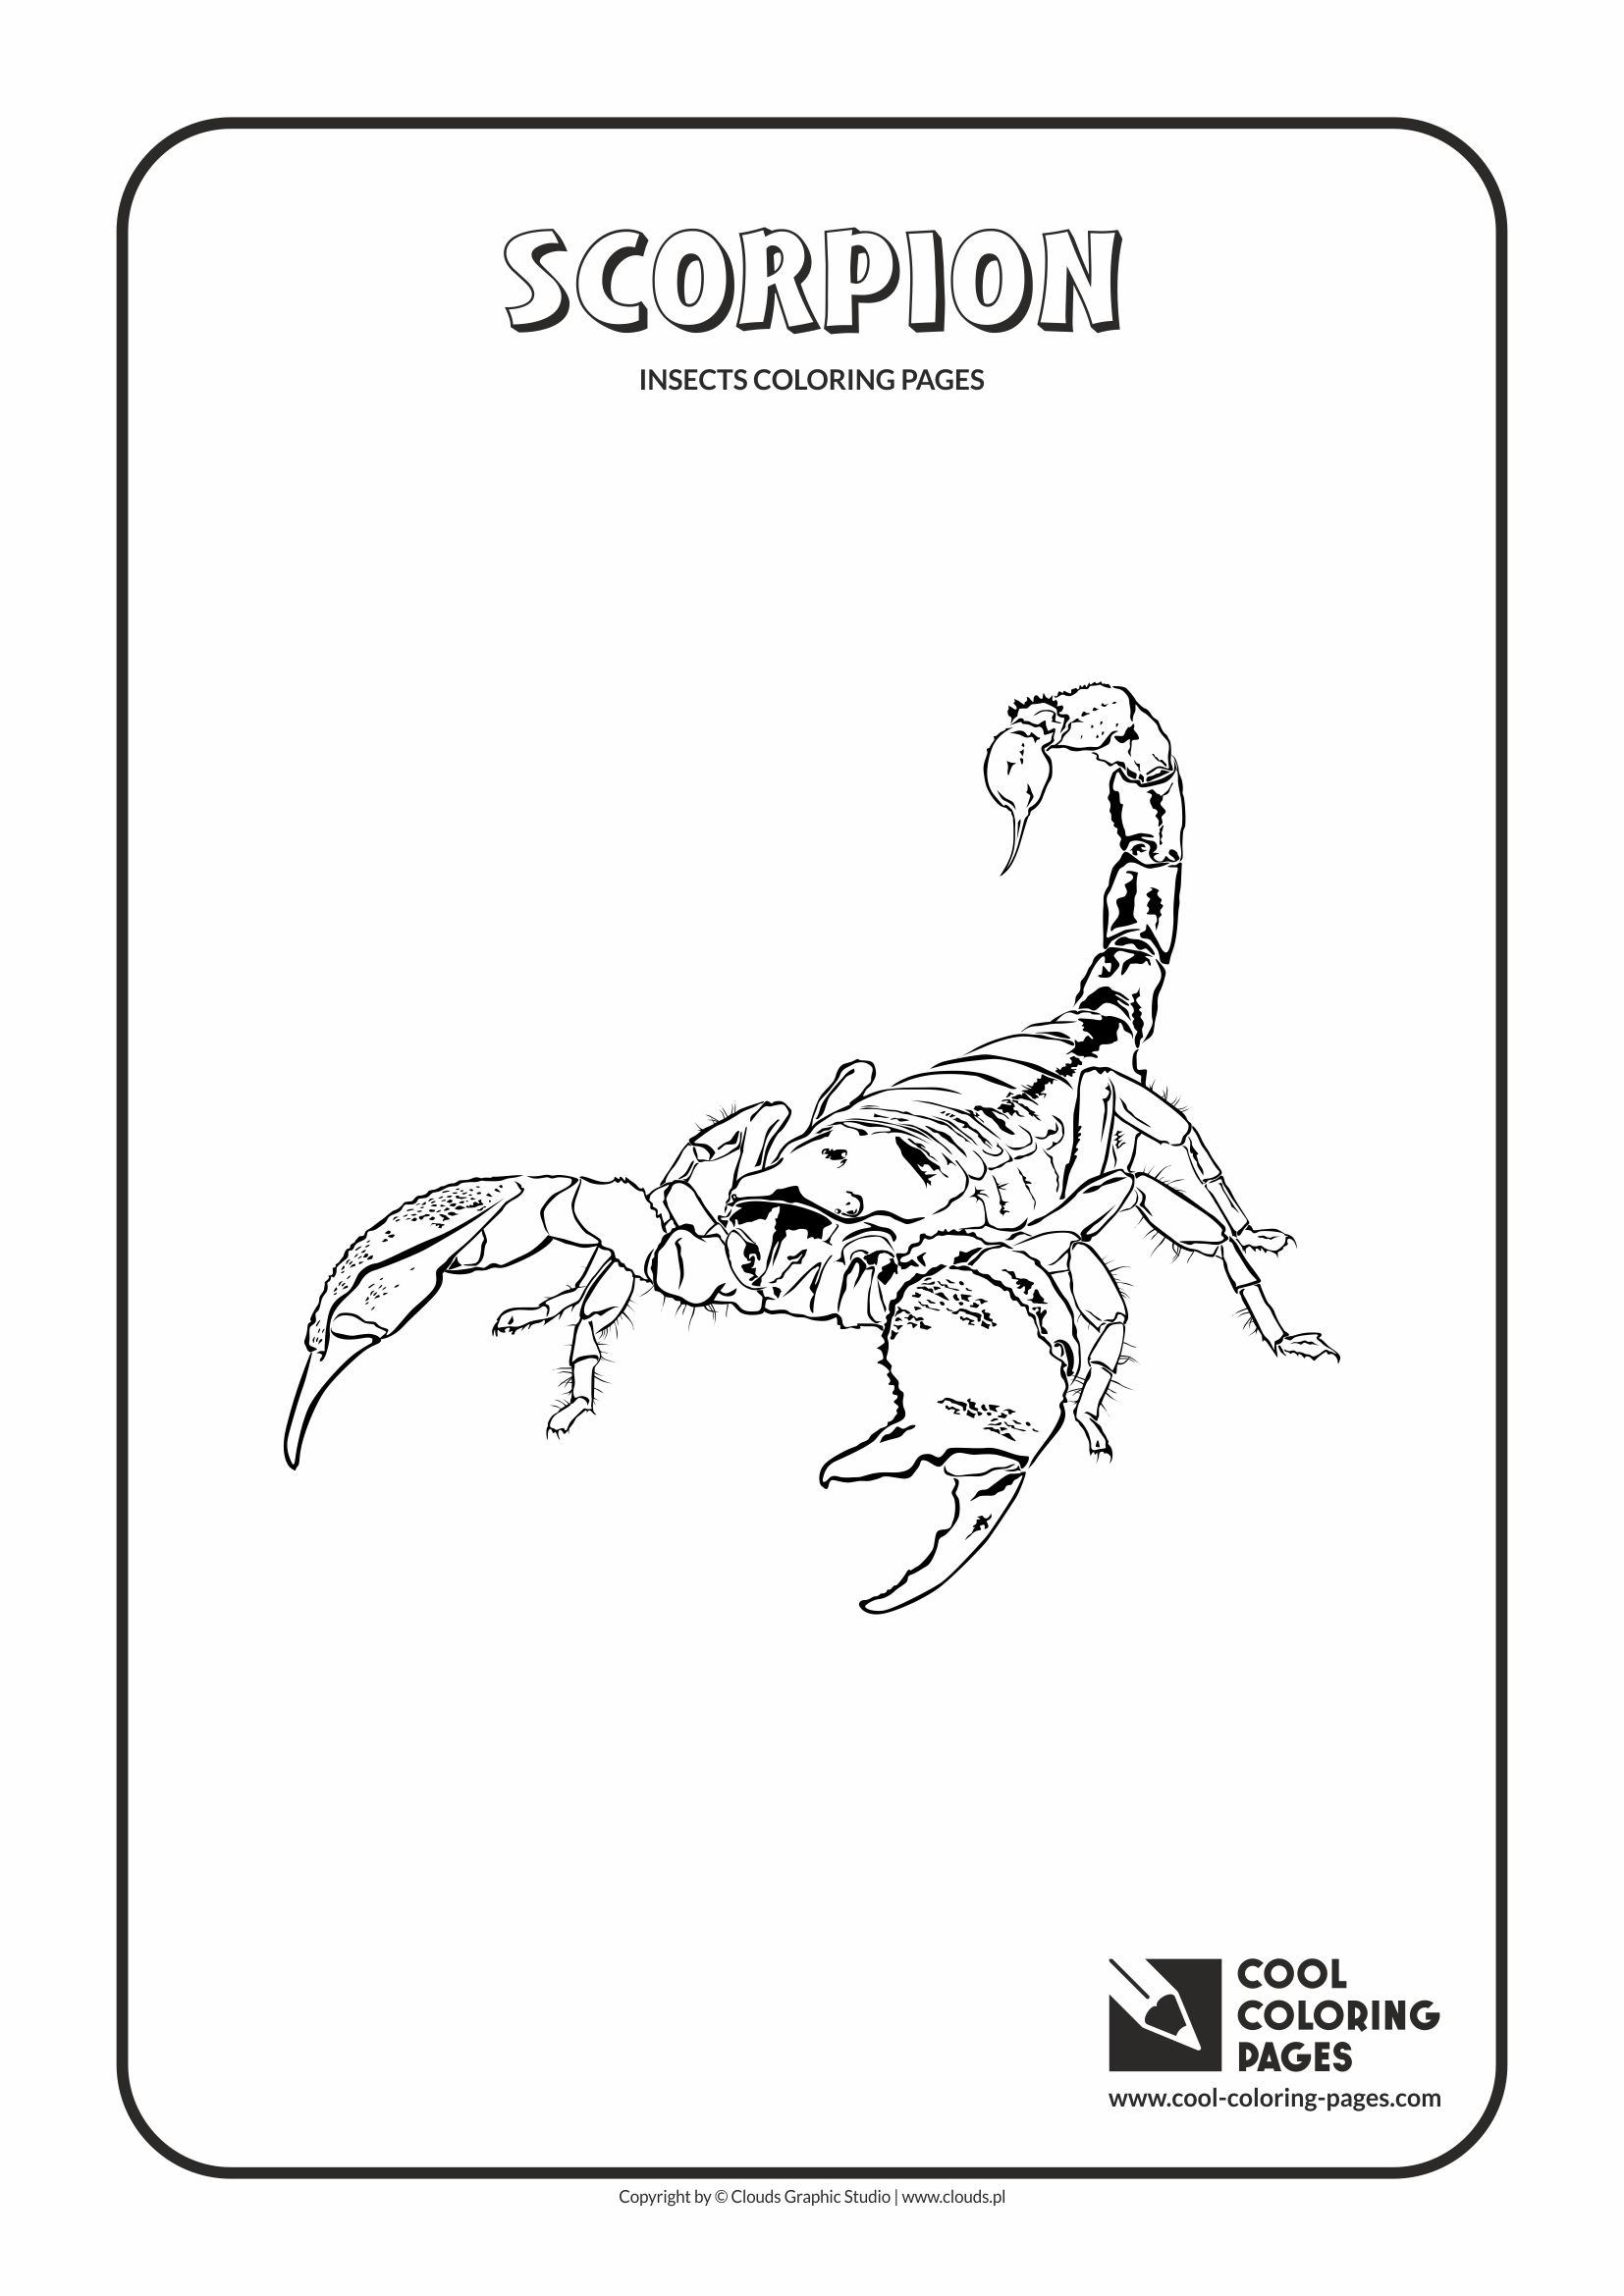 Cool coloring pages scorpion coloring page